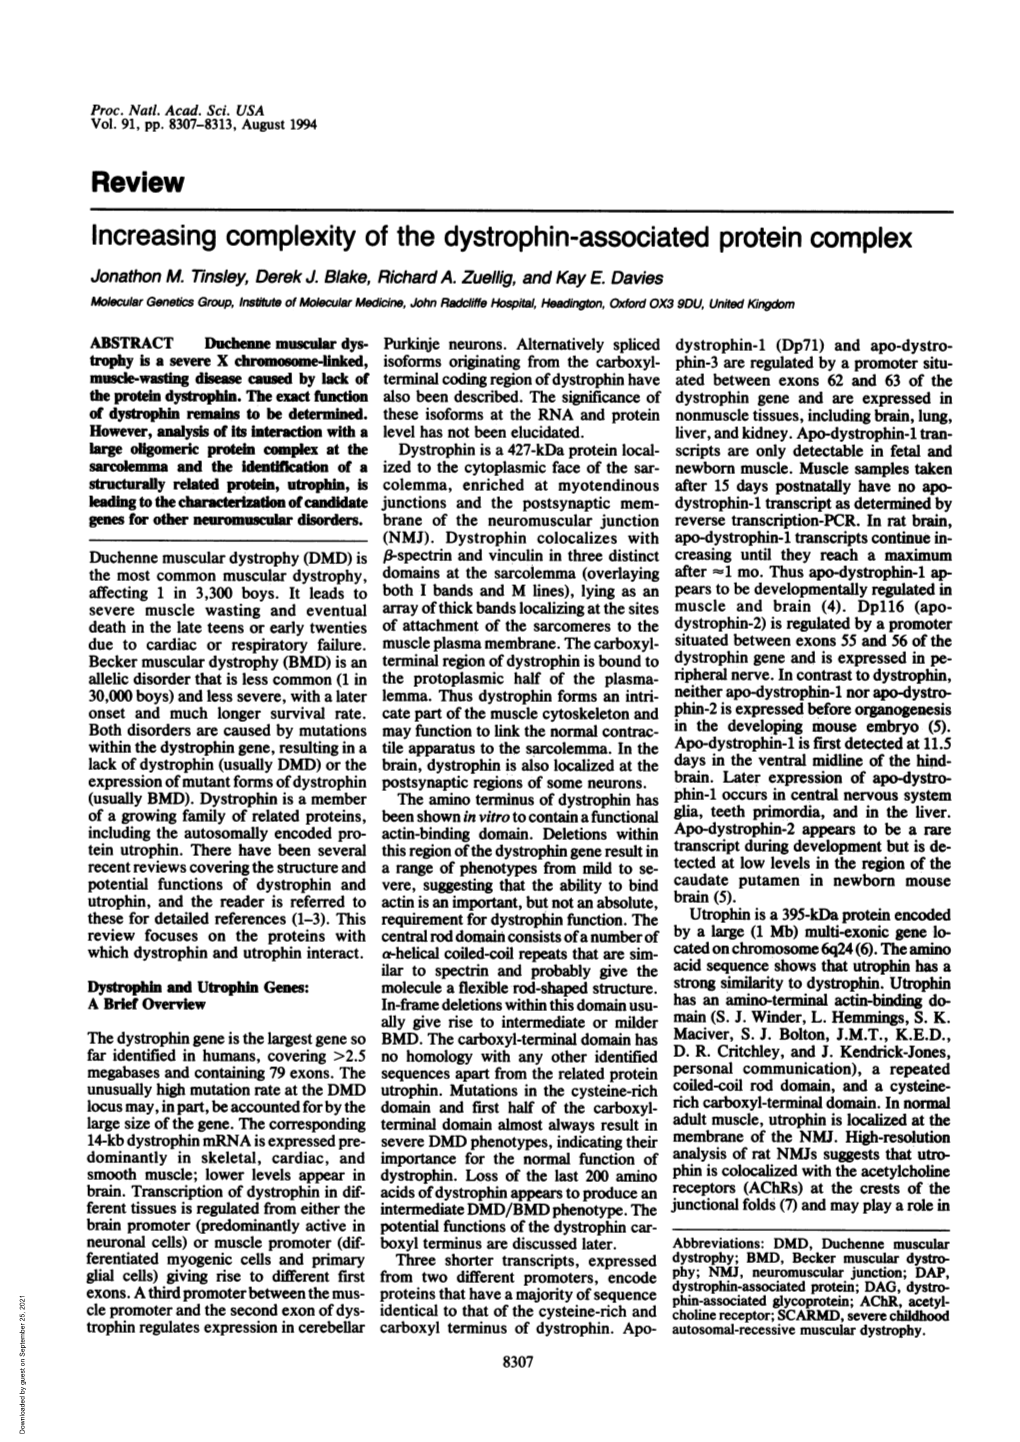 Review Increasing Complexity of the Dystrophin-Associated Protein Complex Jonathon M